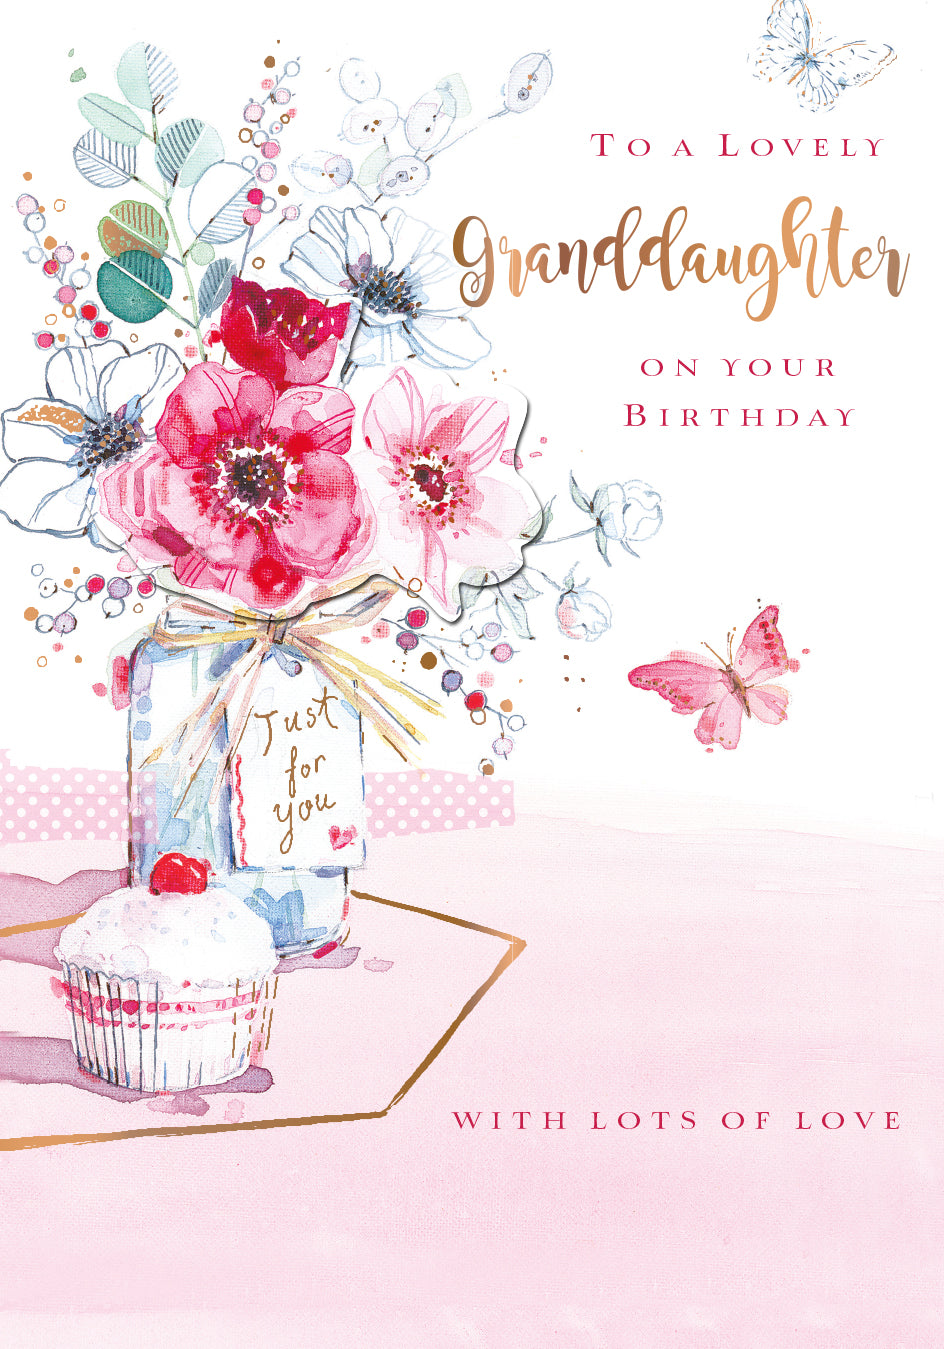 Granddaughter Birthday Card - A Bouquet Of Flowers